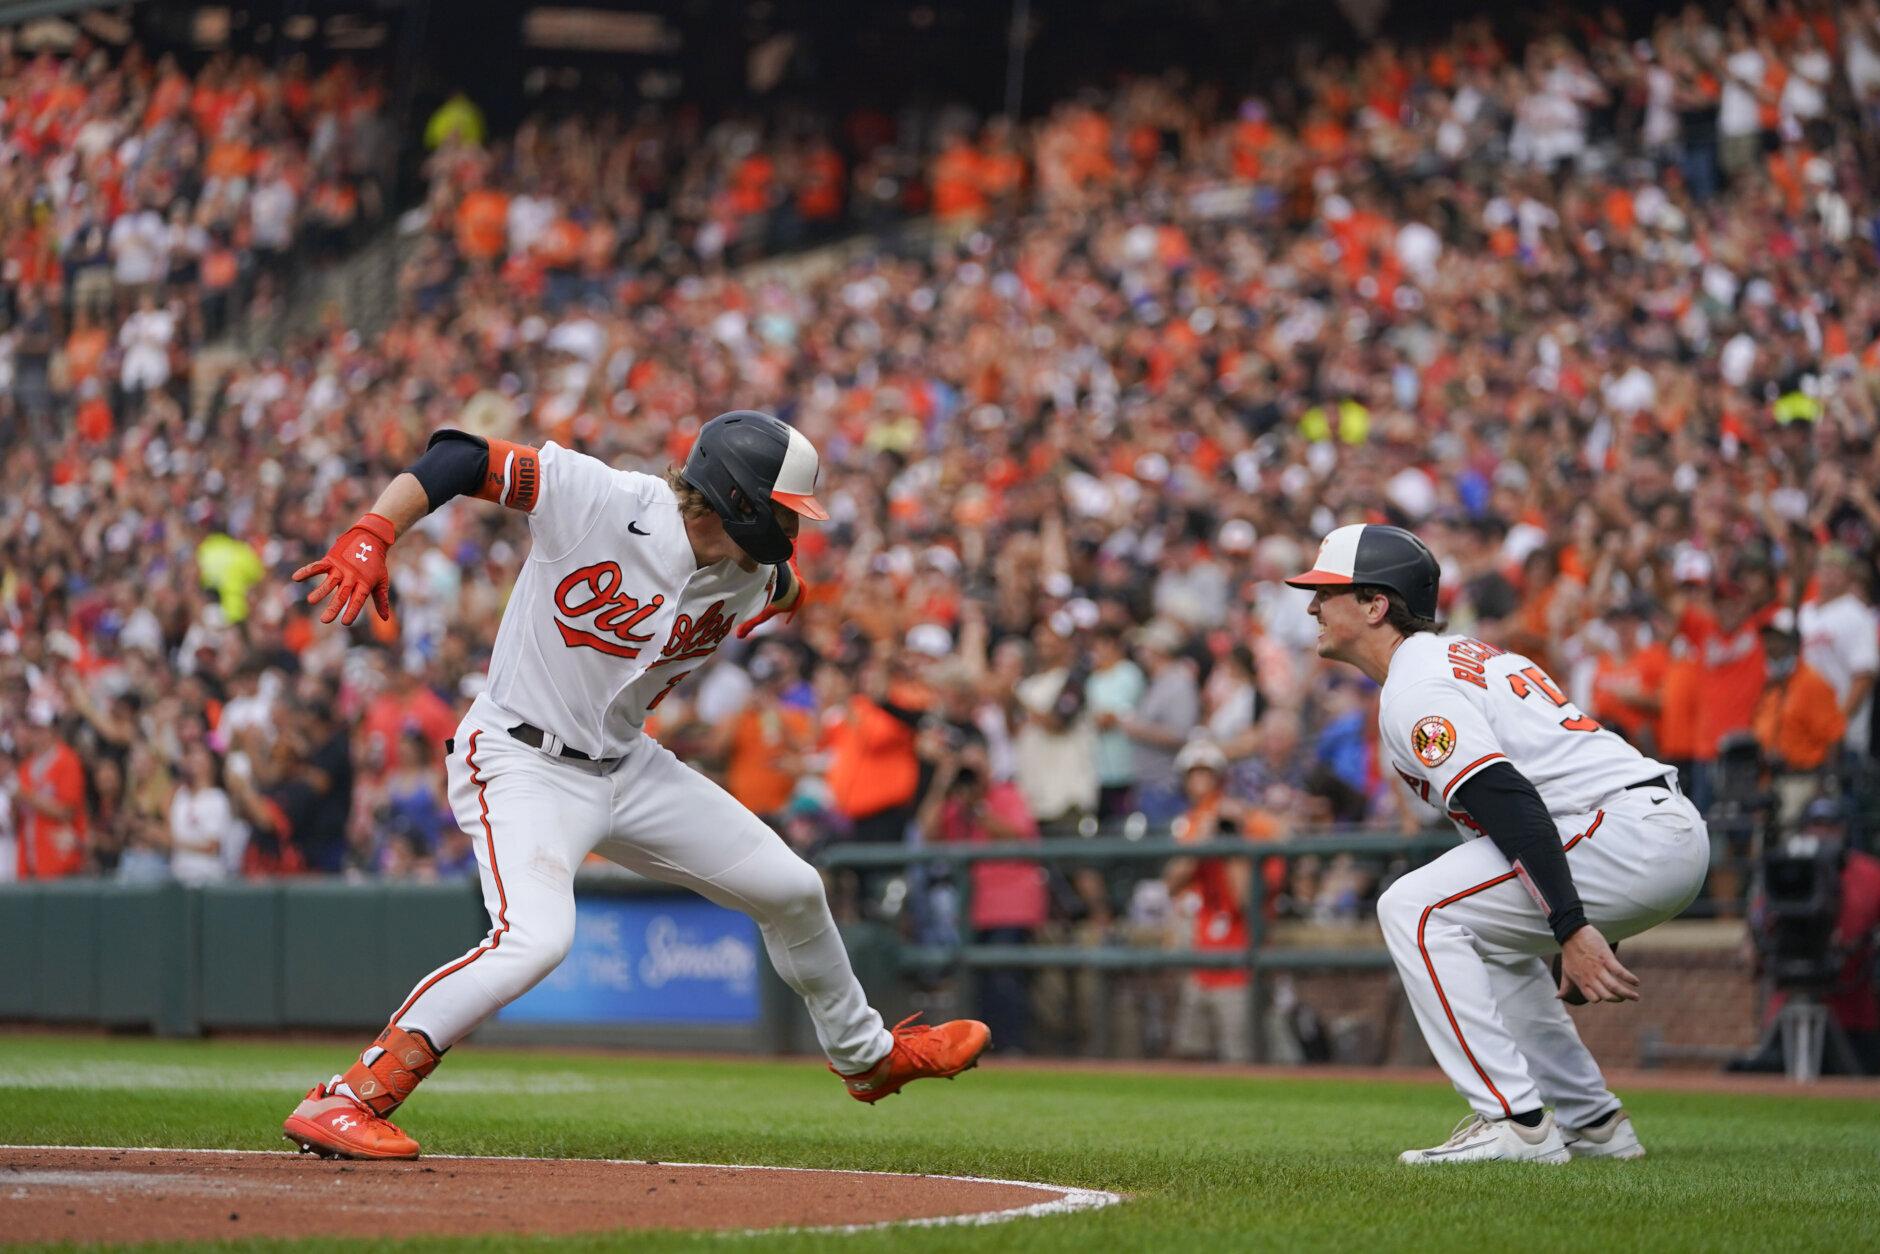 BALTIMORE, MD - August 5: Baltimore Orioles catcher Adley